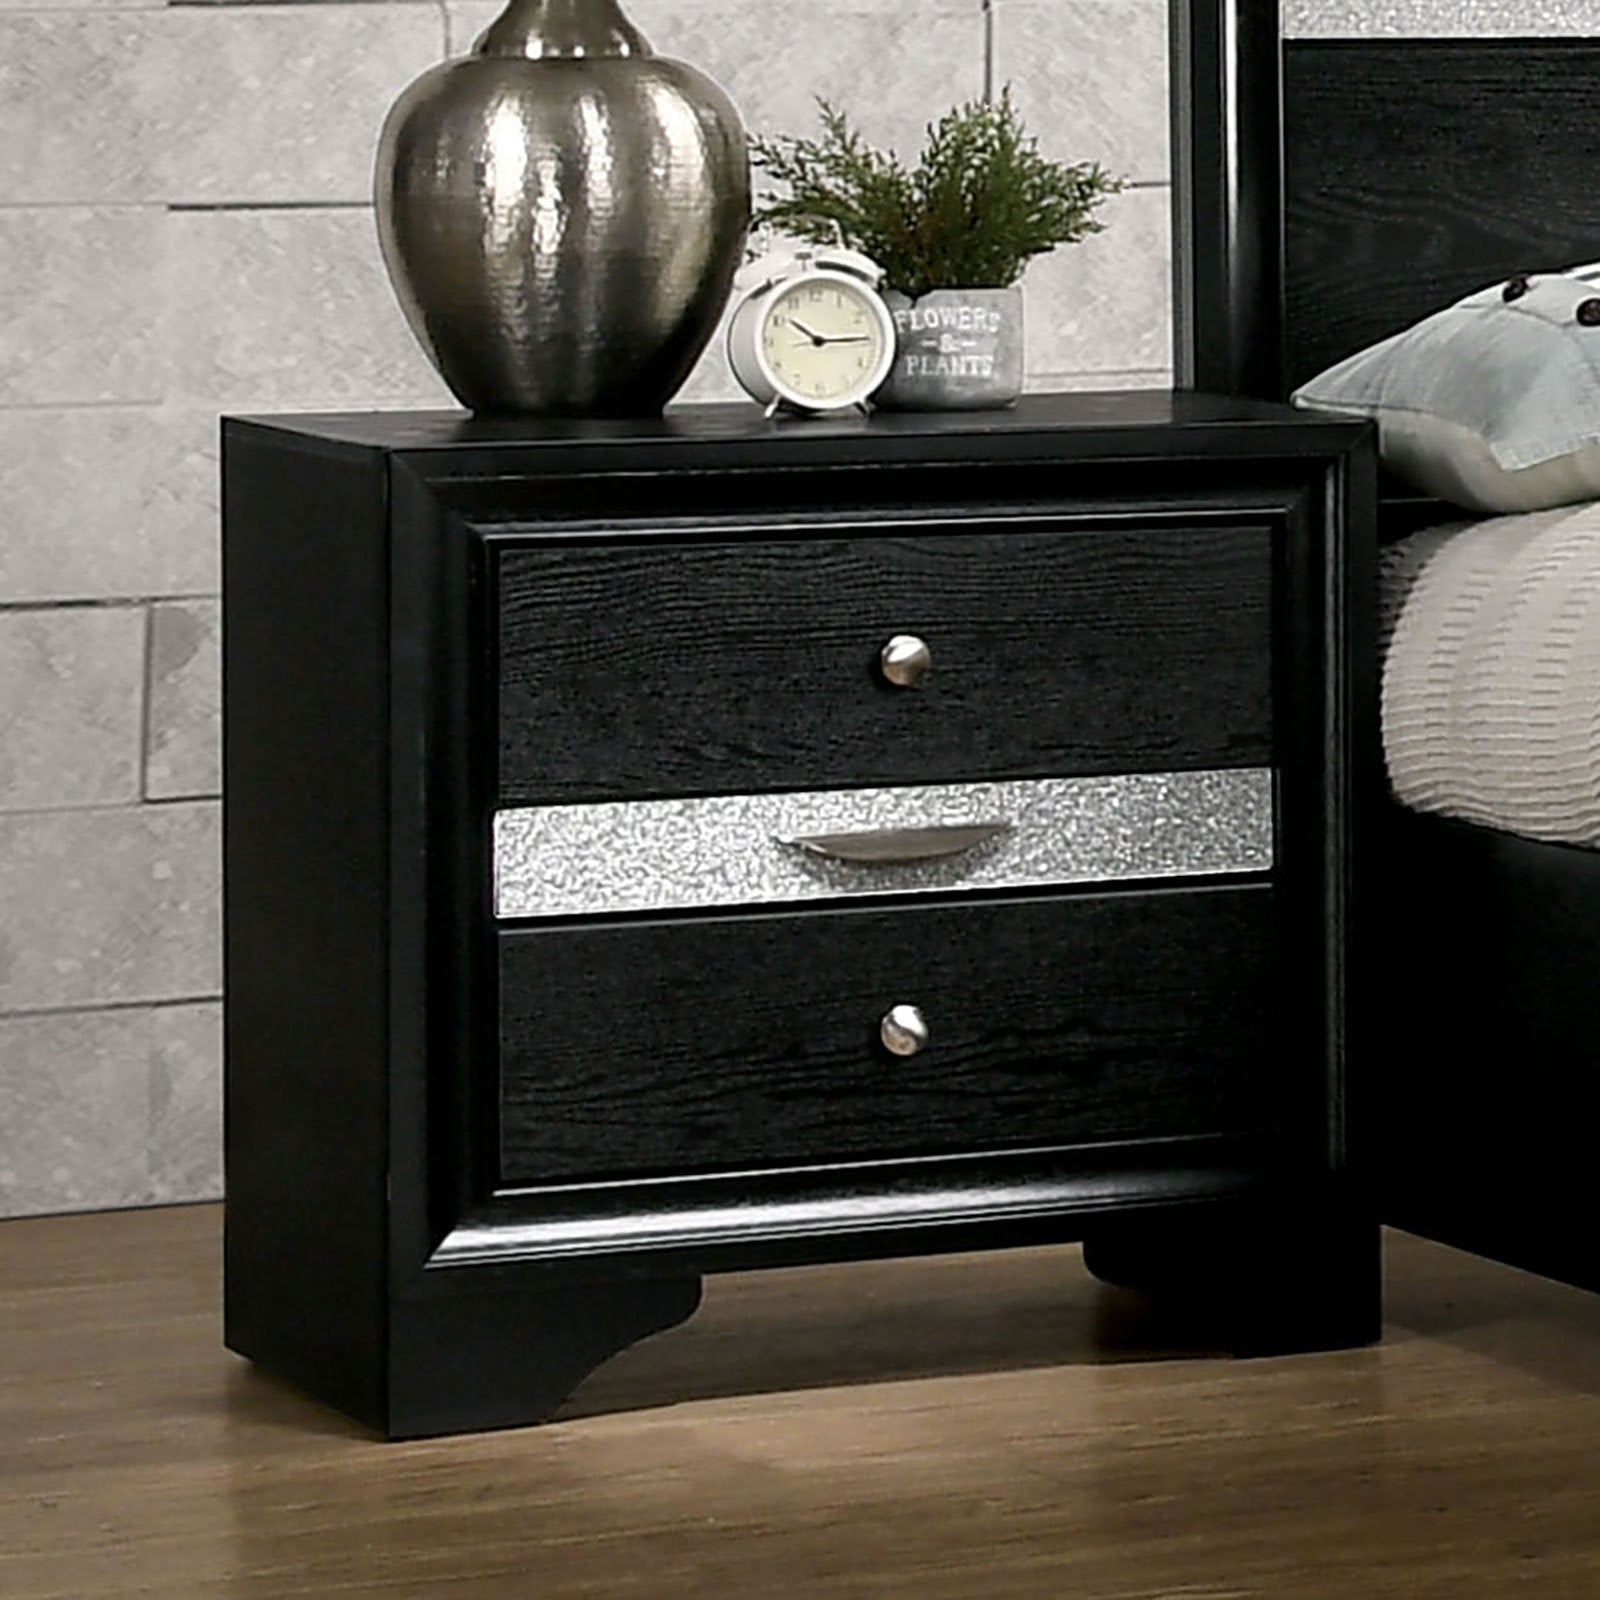 Nightstand-Black-Finish-Silver-Accents-Hidden-Jewelry-Drawer-Nickel-Round-Knob-Bedside-Table-Bedroom-Furniture-End-&-Side-Tables